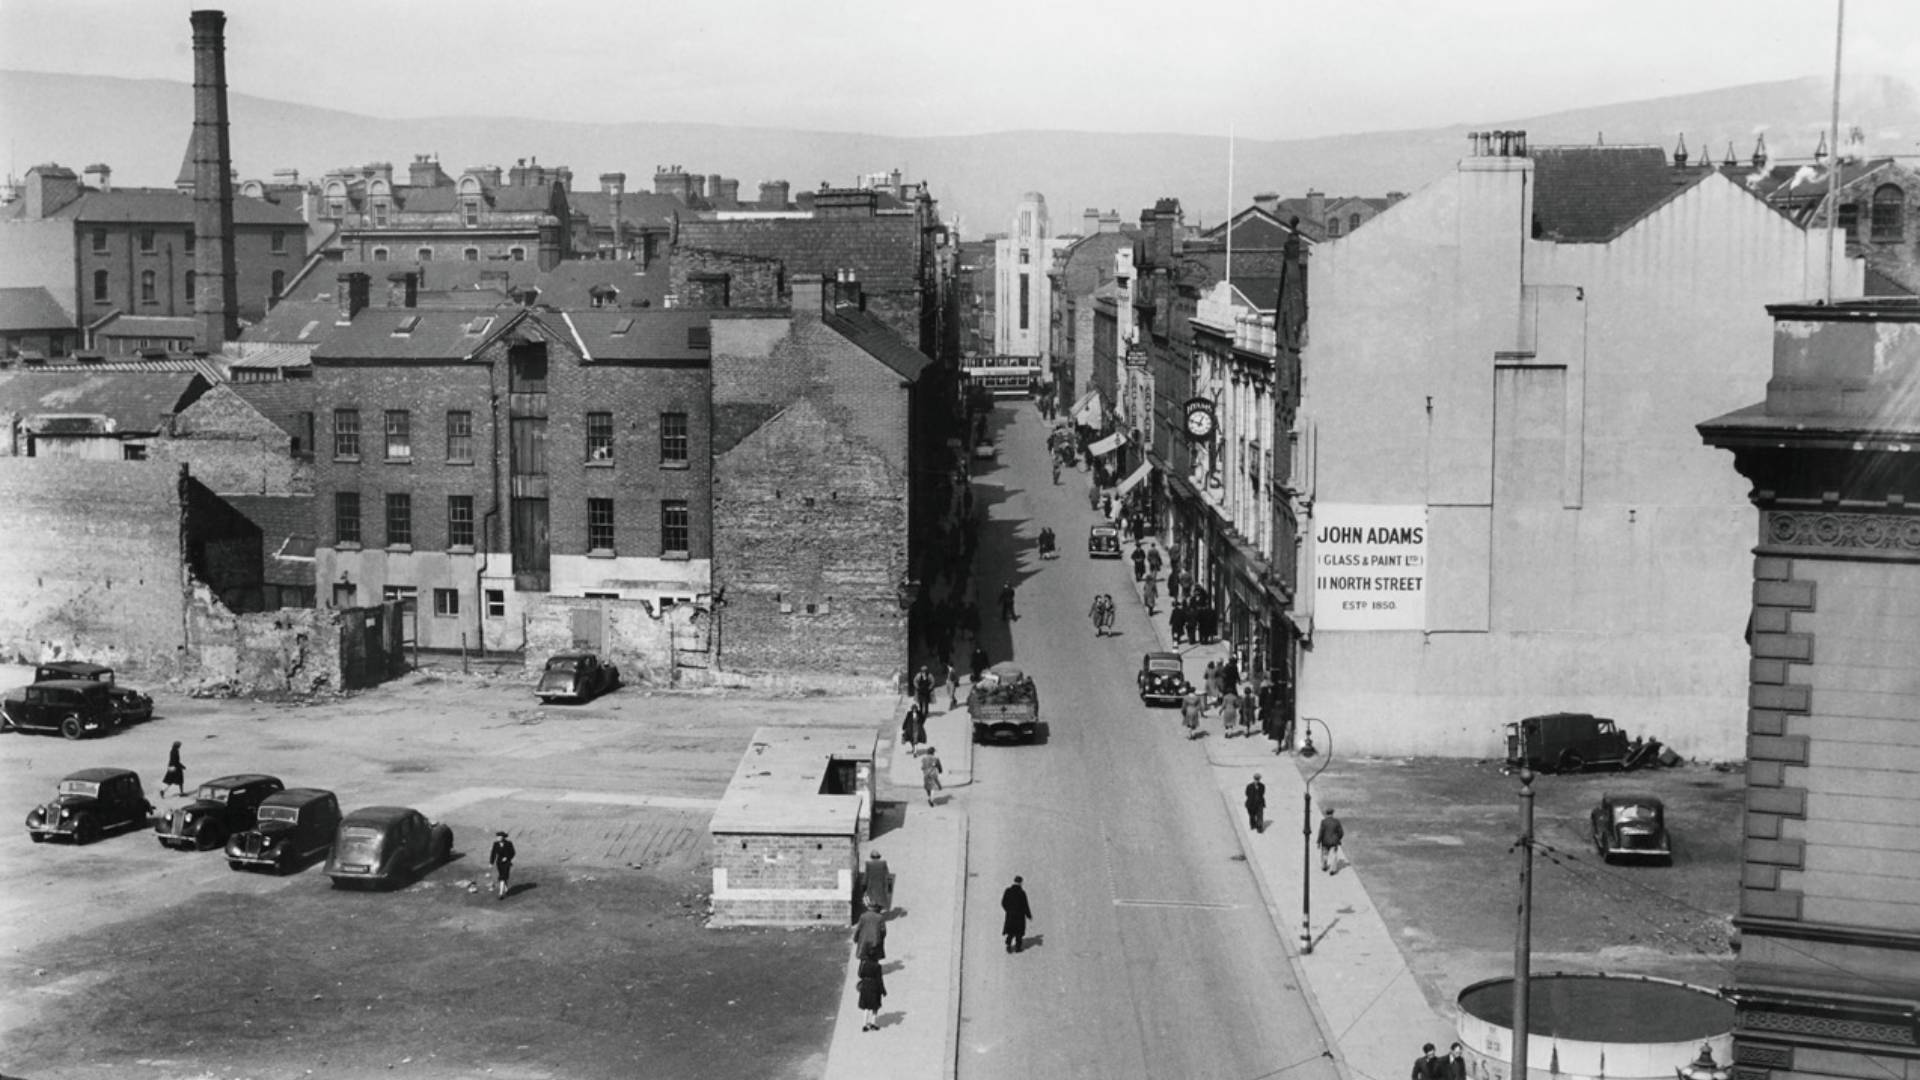 Large sections of the city centre were cleared in the years following the Belfast Blitz, including the area around the junction of North Street, Waring Street, Bridge Street, and Rosemary Street.